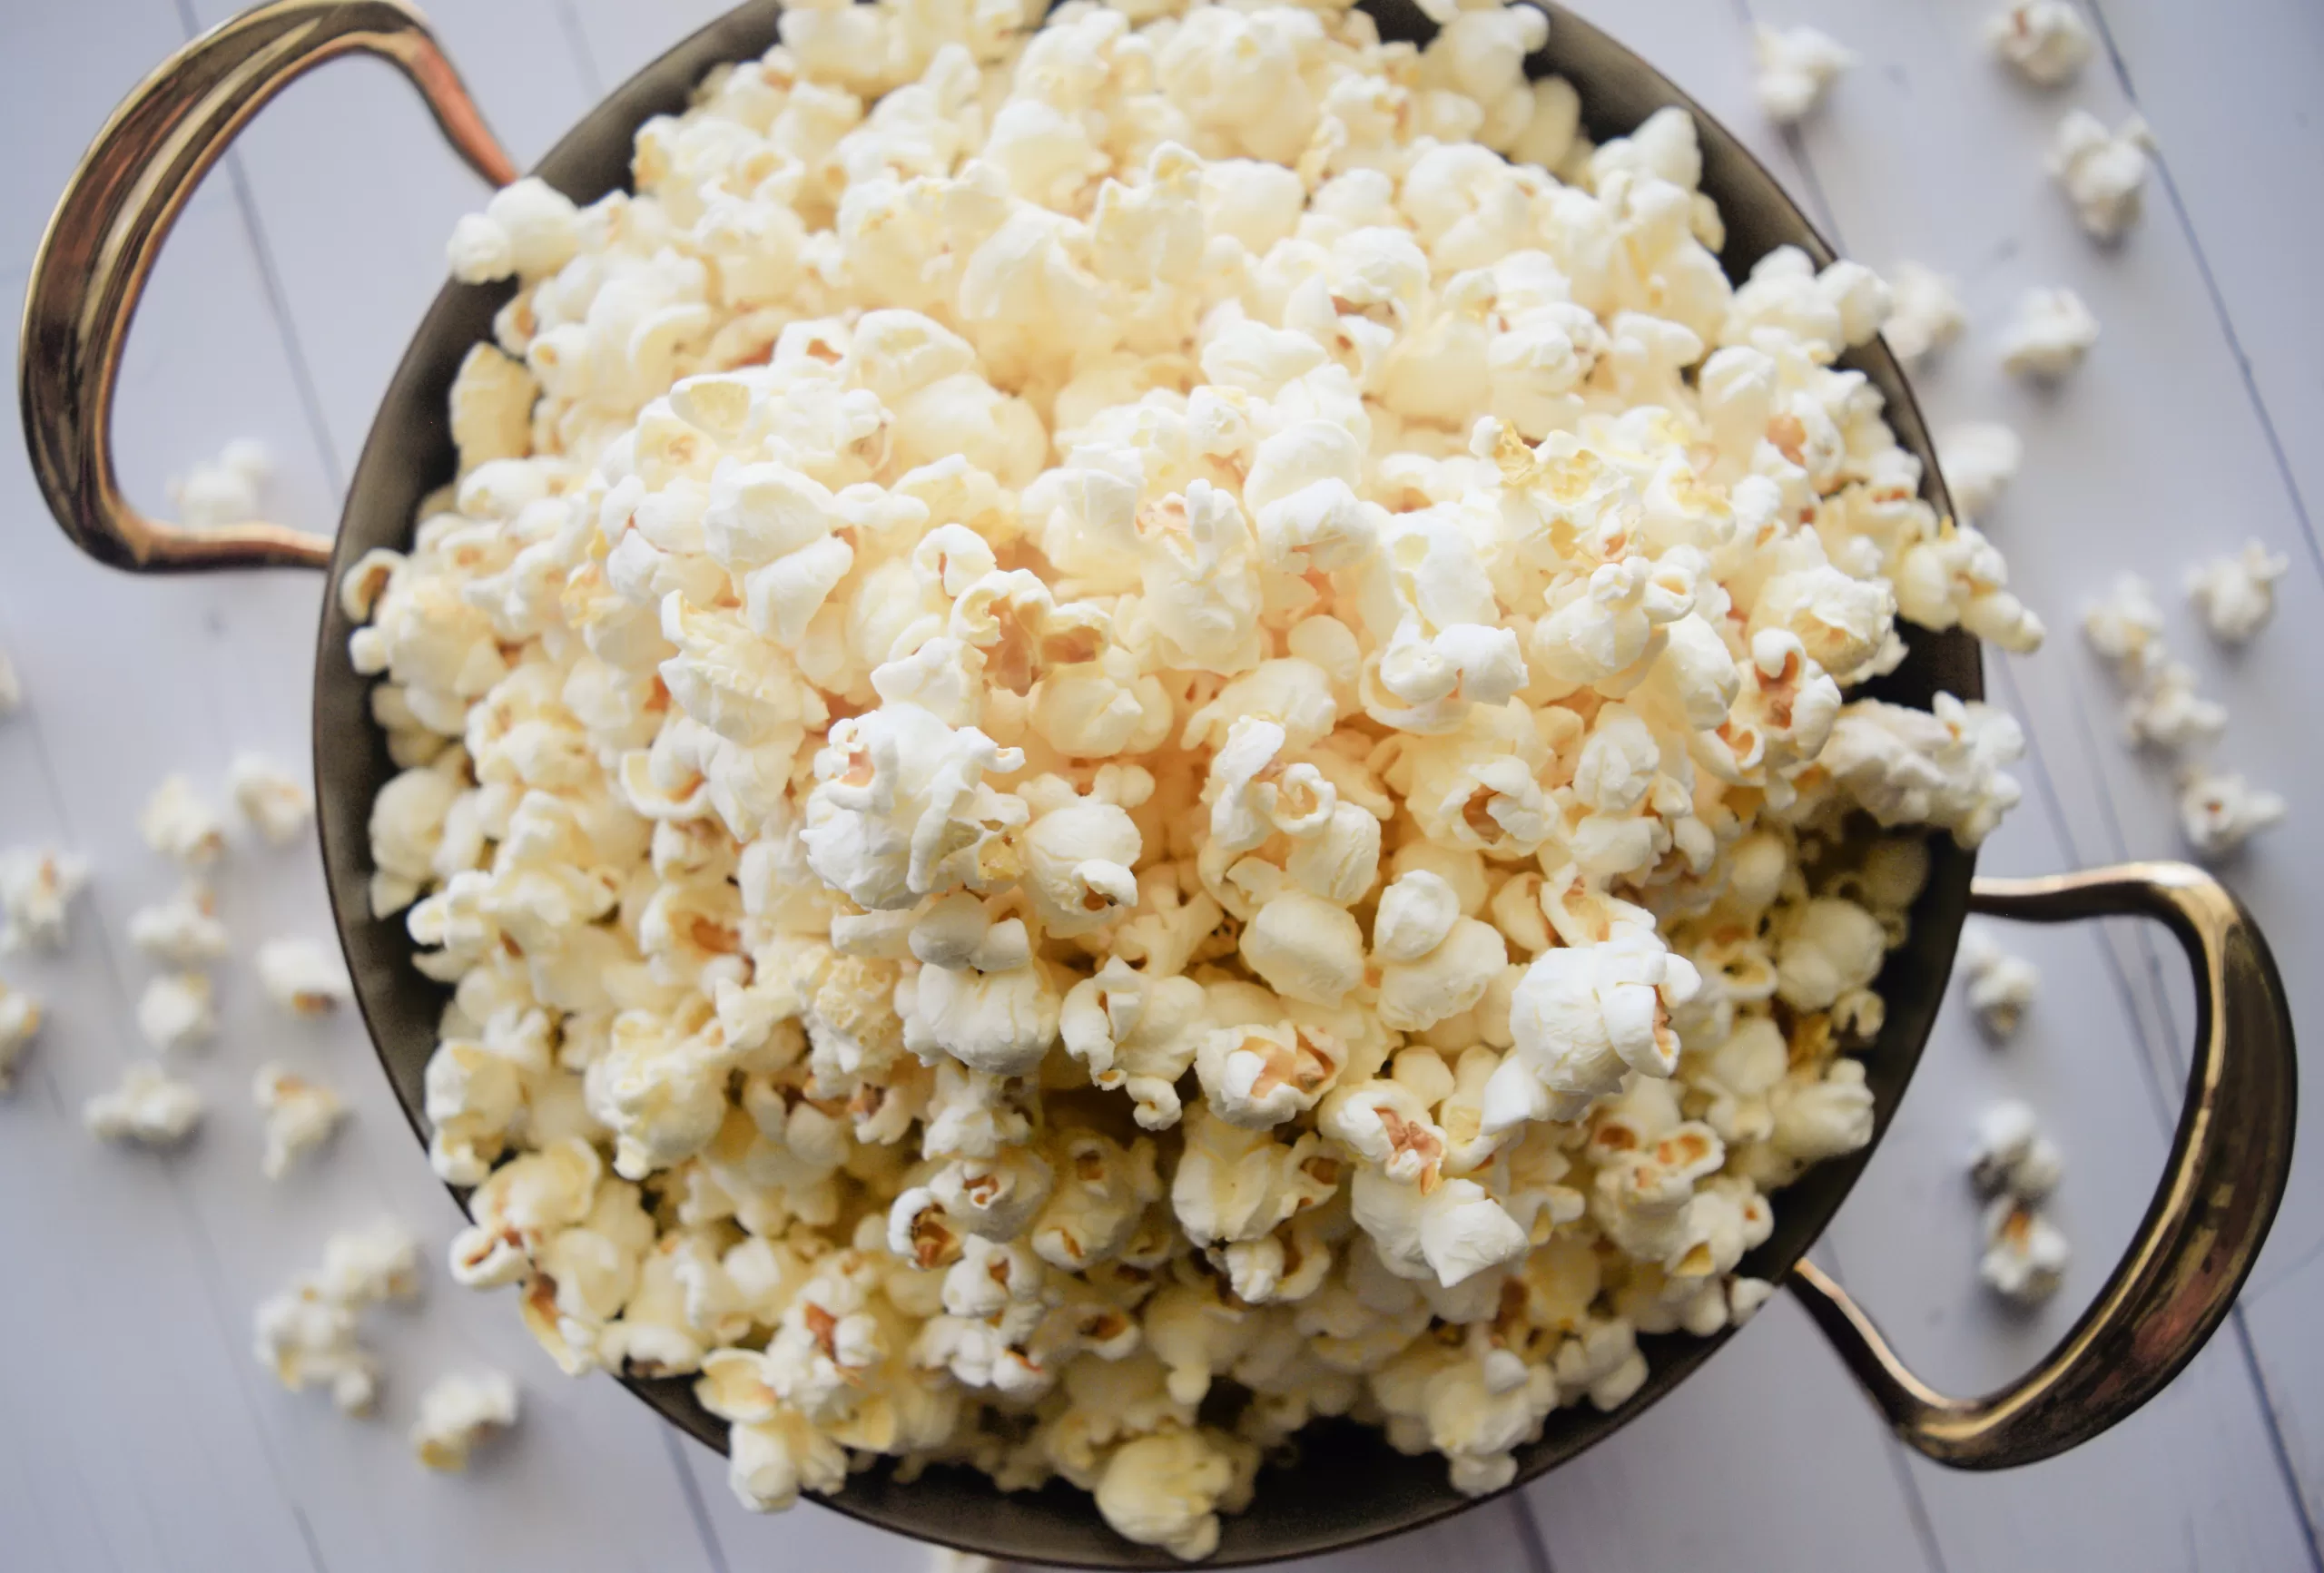 Popcorn made from the best oil (coconut oil) in a pot on a white counter top.